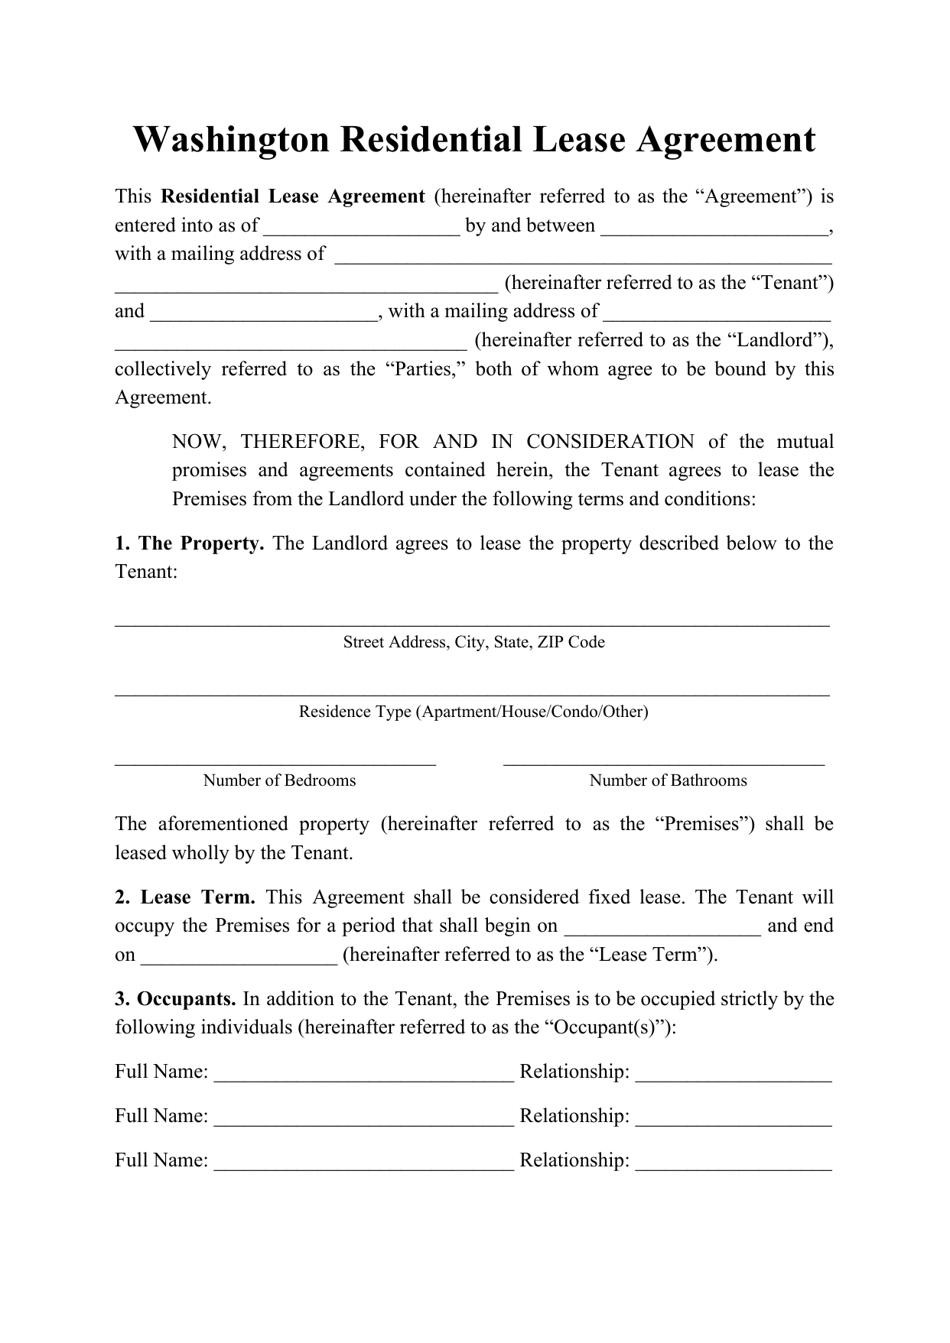 washington-residential-lease-agreement-template-fill-out-sign-online